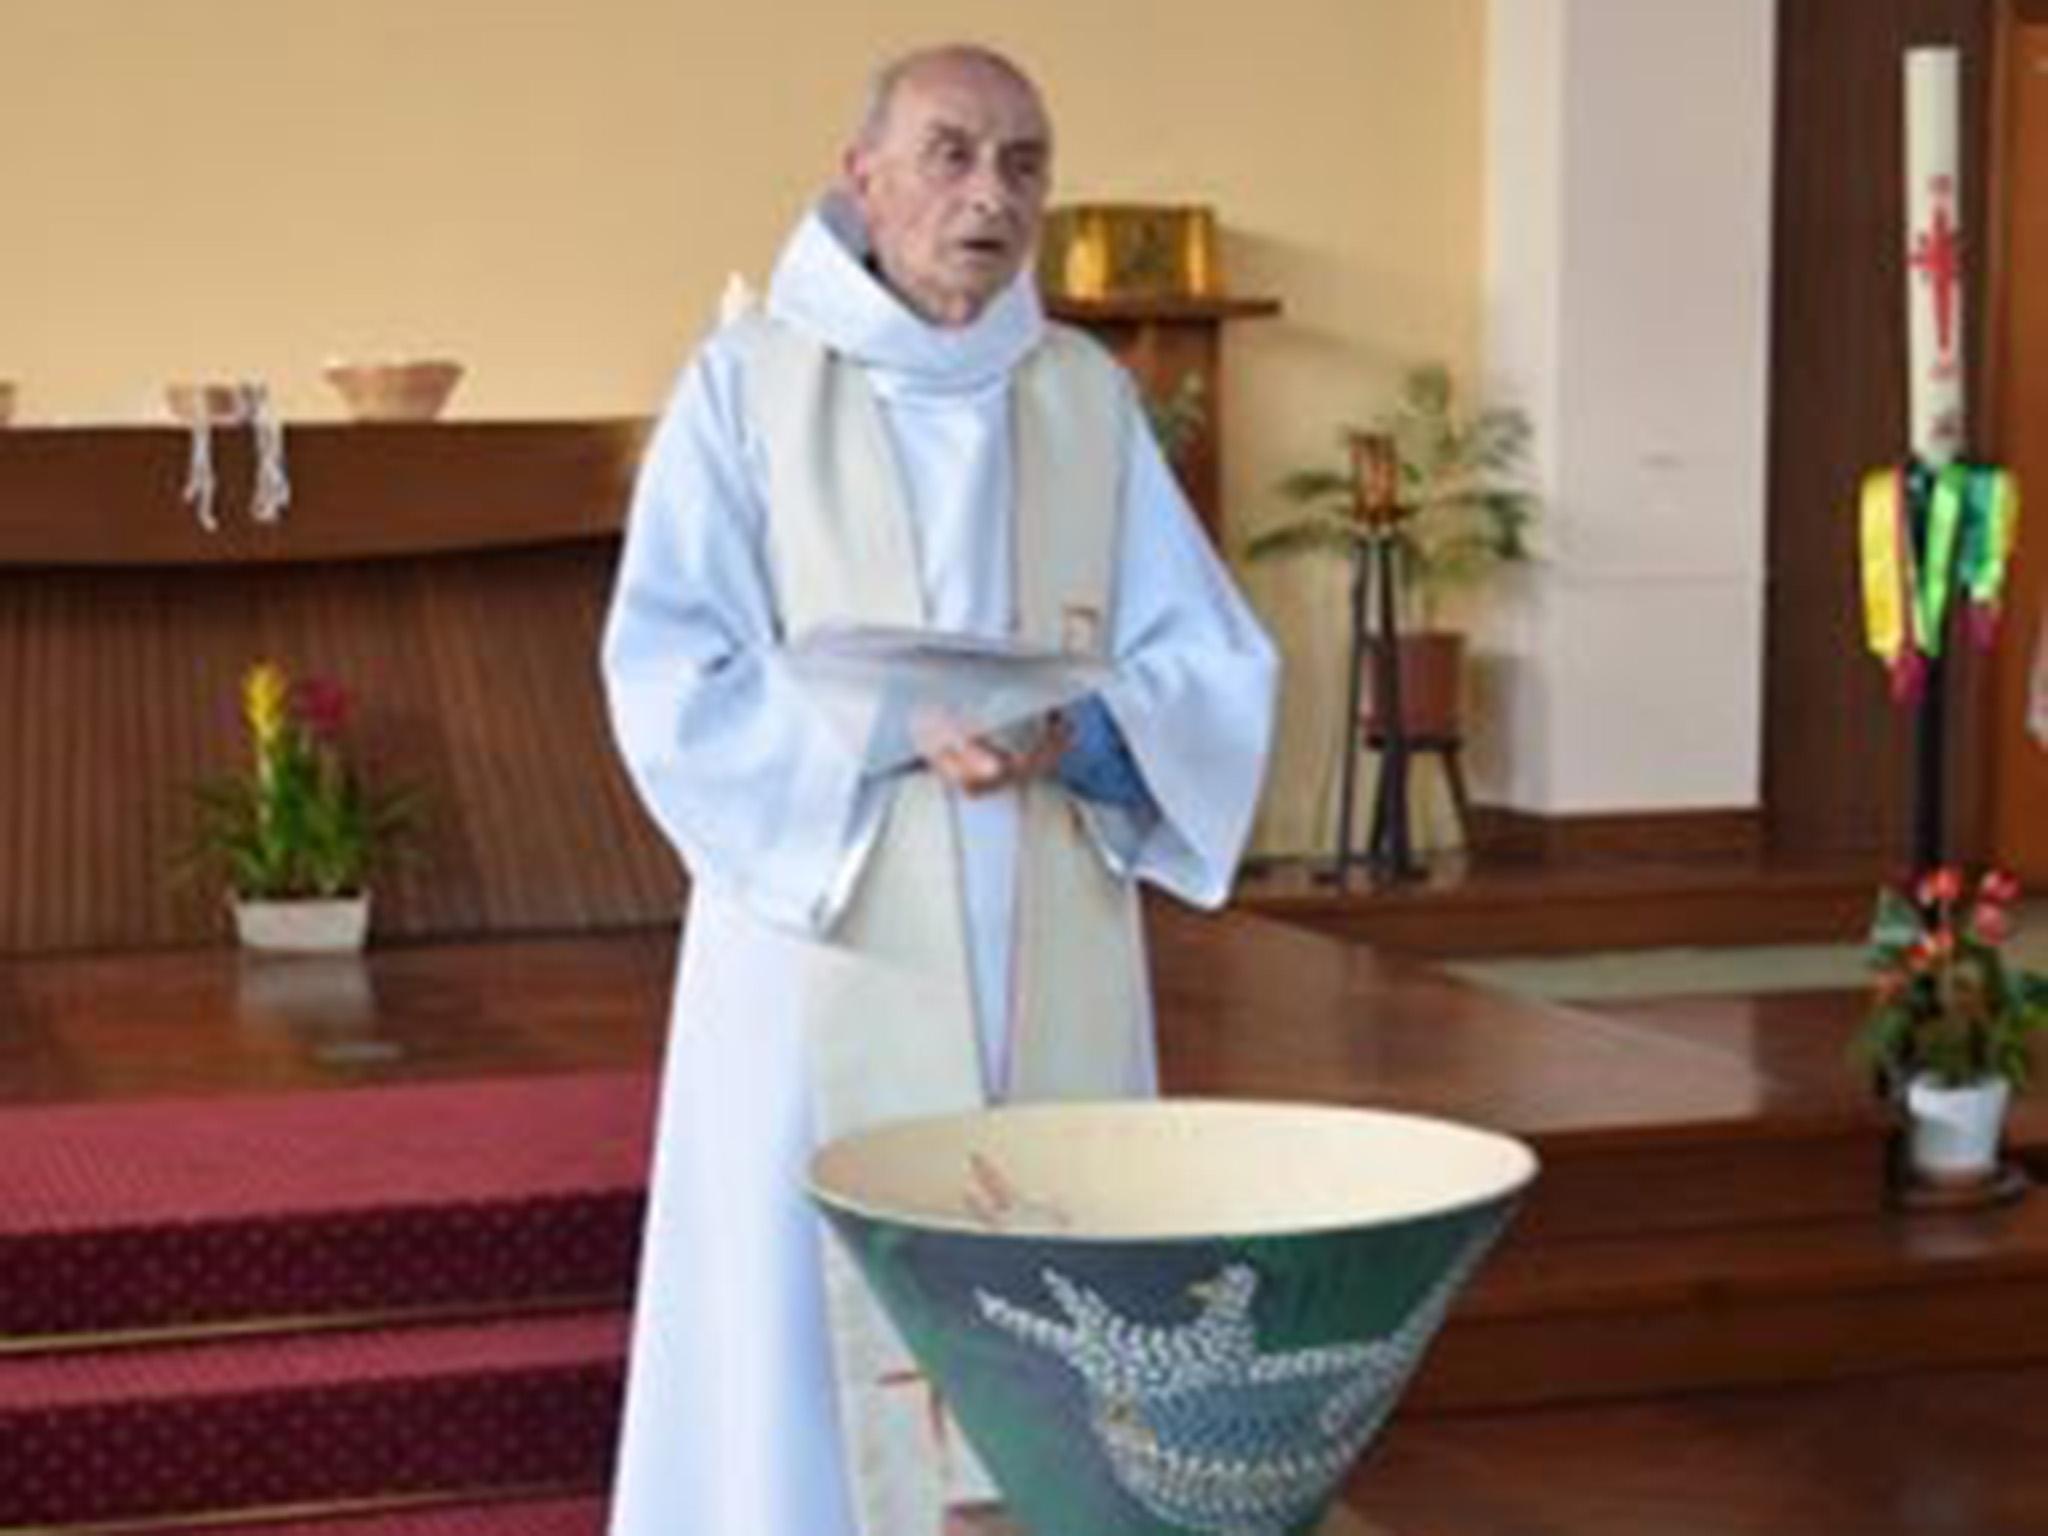 Father Jacques Hamel was murdered in a church in Normandy